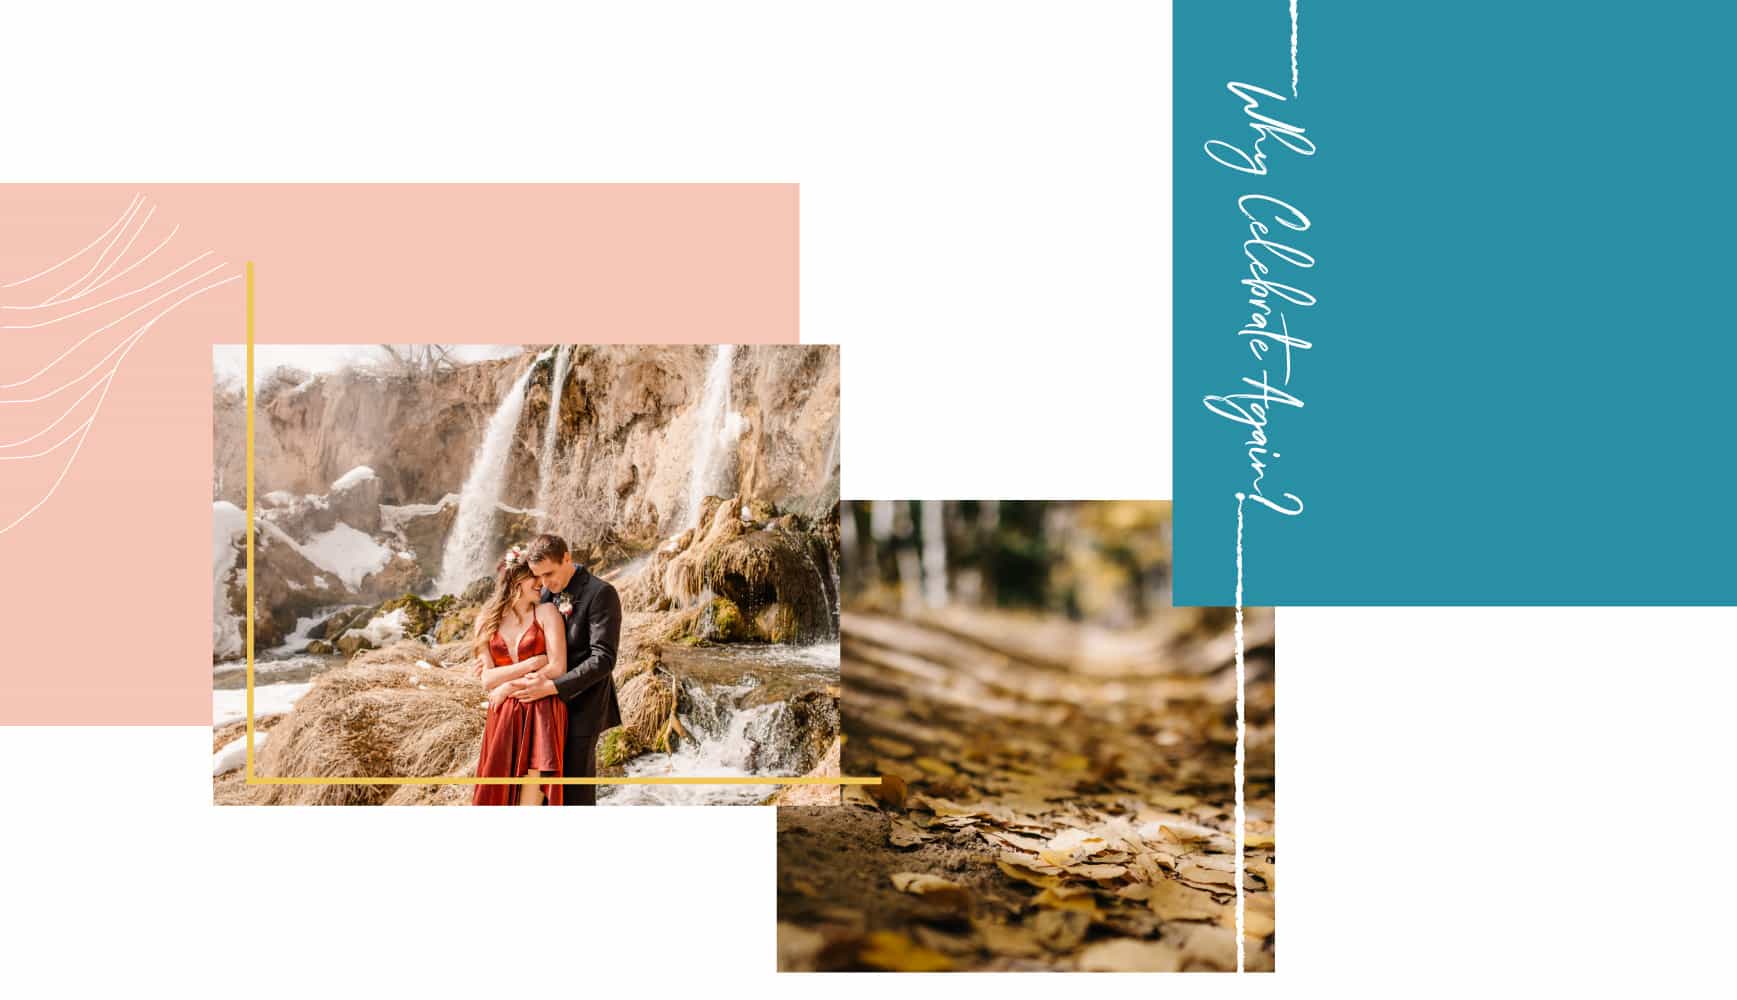 couple standing by waterfall, leafs on the ground, text "why celebrate?"